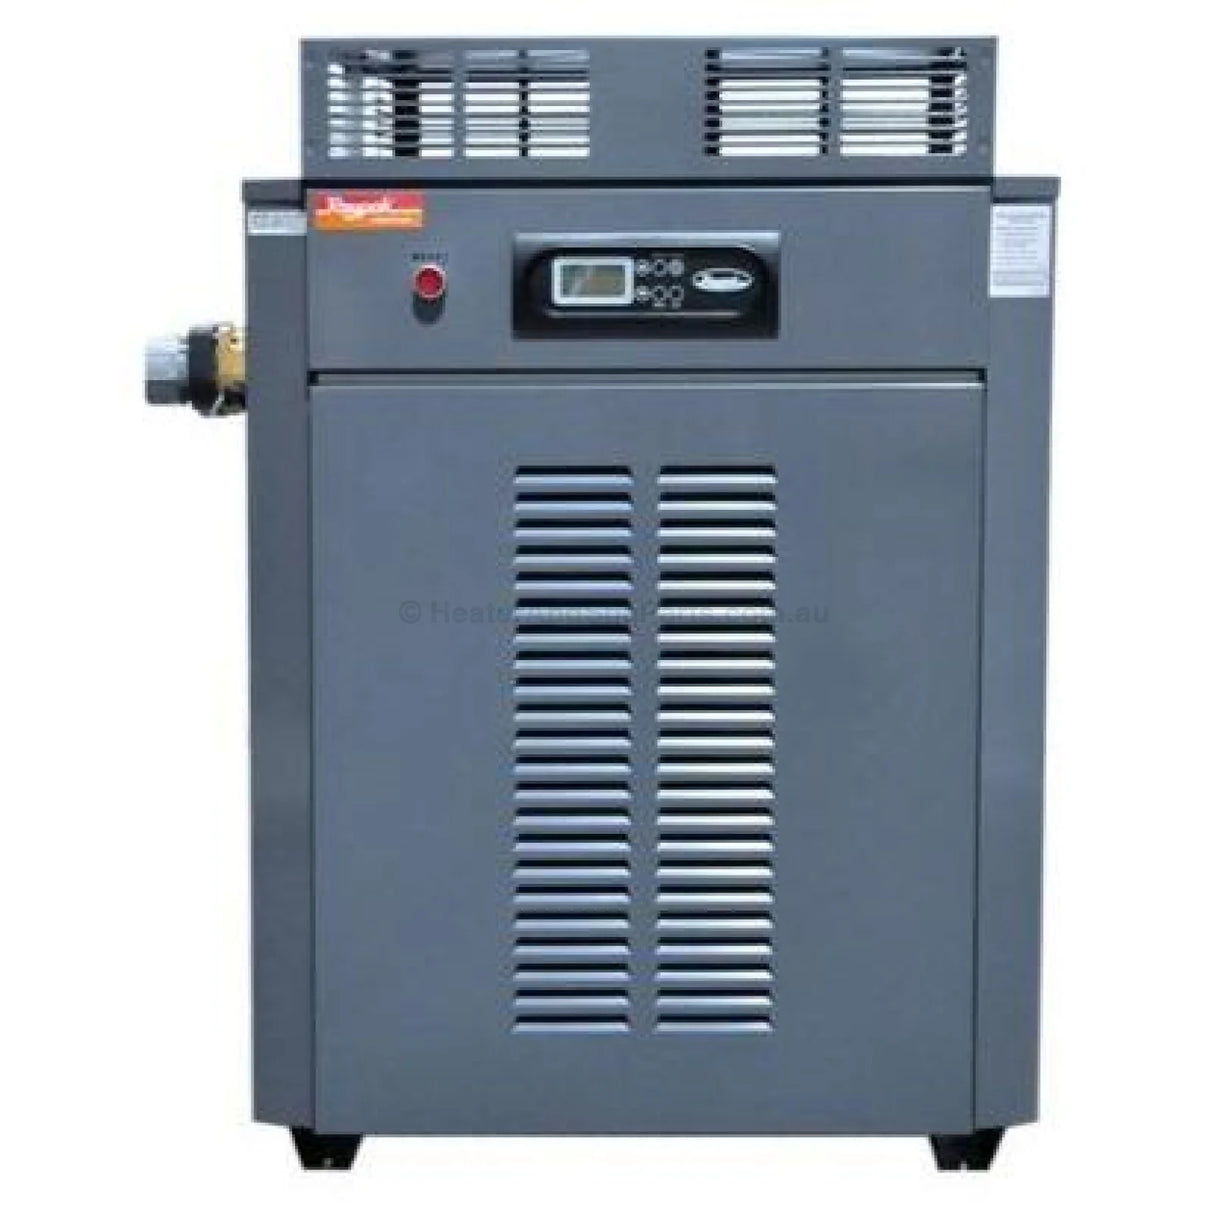 Raypak Premium 430 Gas Pool & Spa Heater - Commercial - Heater and Spa Parts